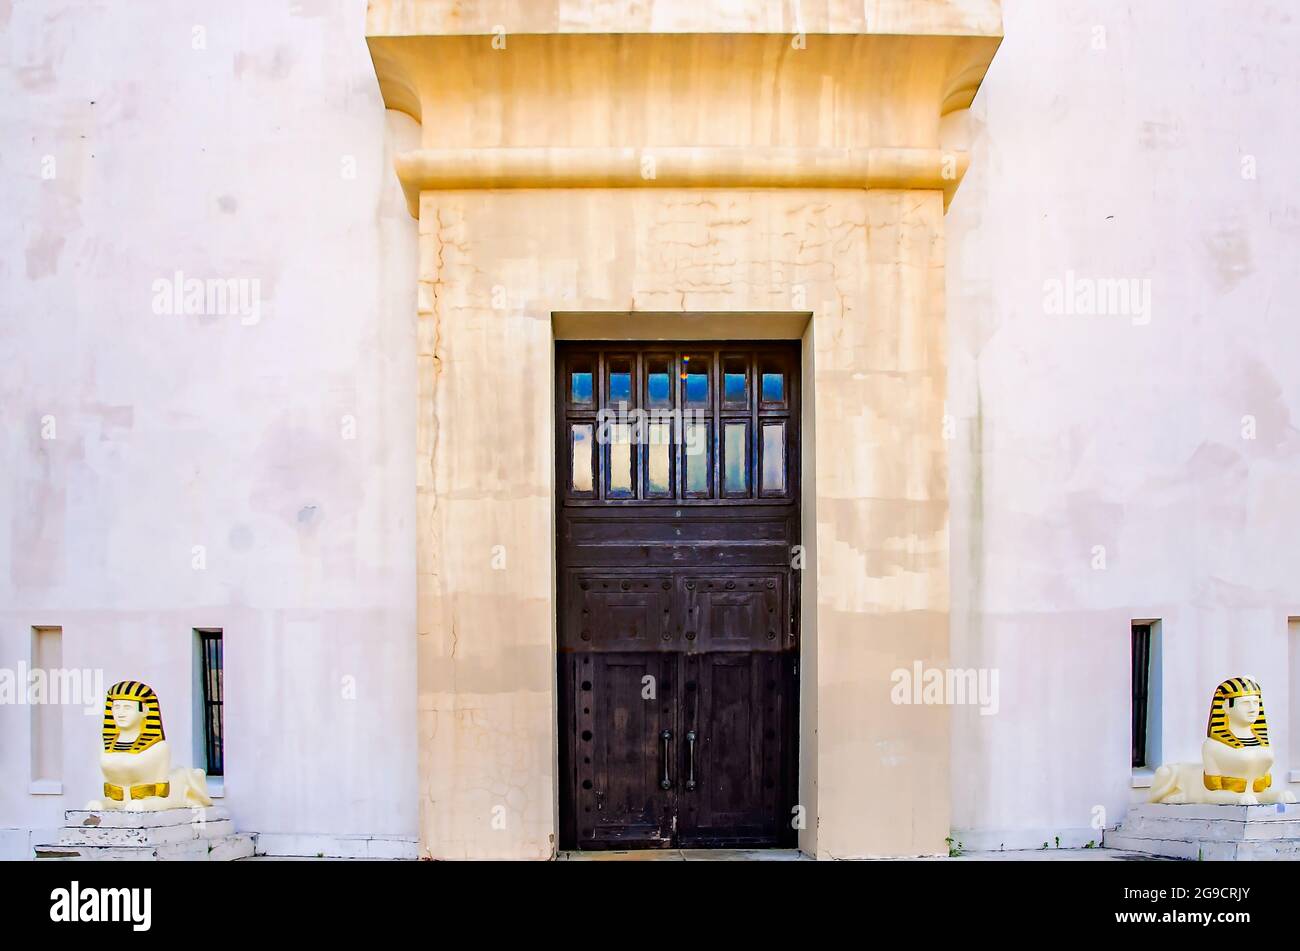 The Scottish Rite Temple, also known as The Temple Downtown, features two sphynx statues at the entrance, July 23, 2021, in Mobile, Alabama. Stock Photo